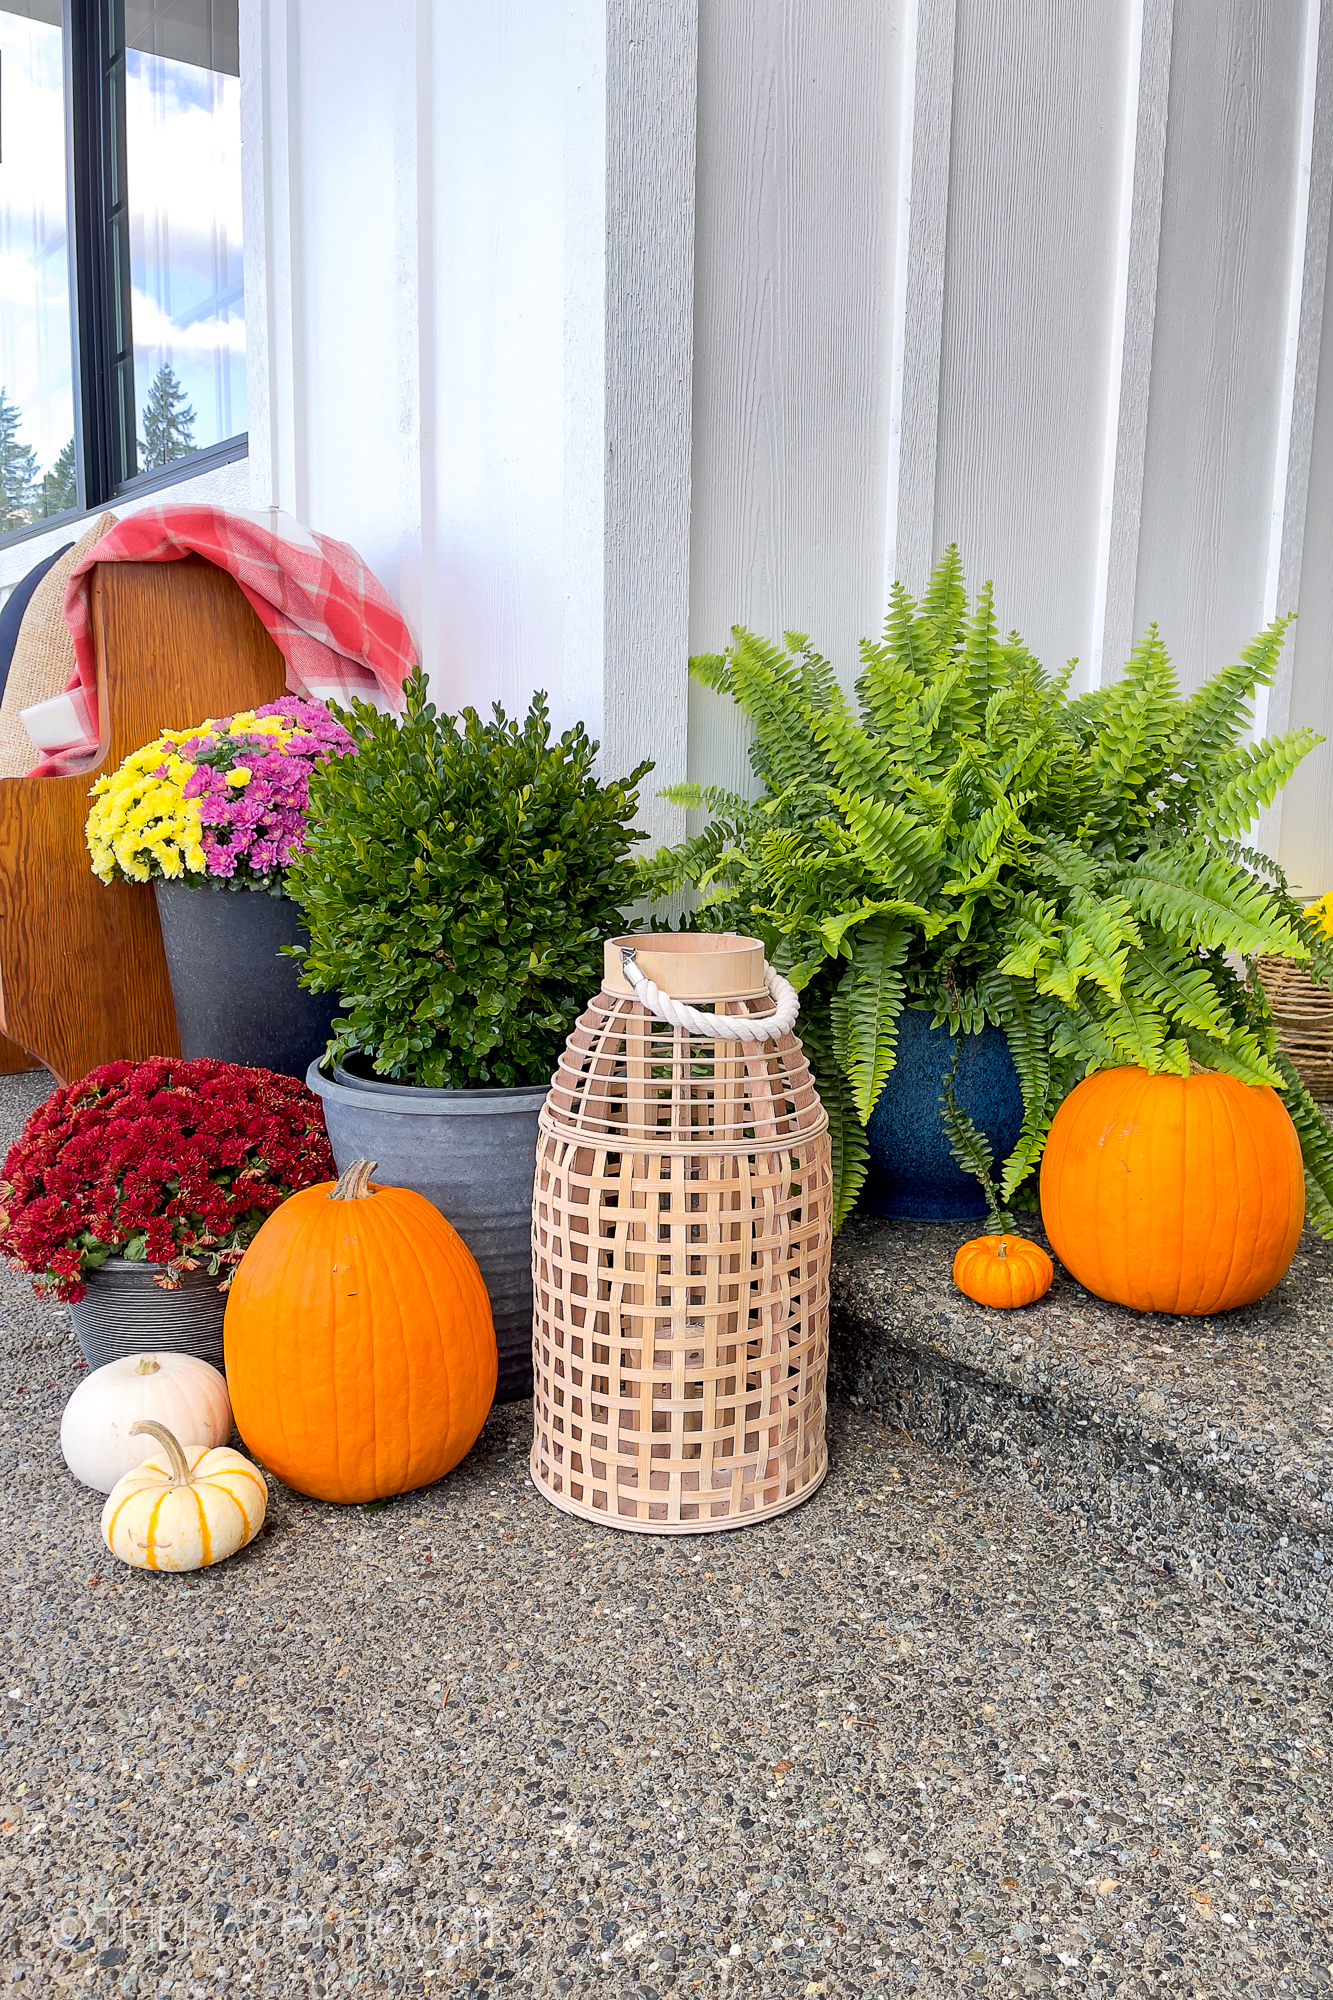 Up close look at the pumpkins and flowers on the porch.